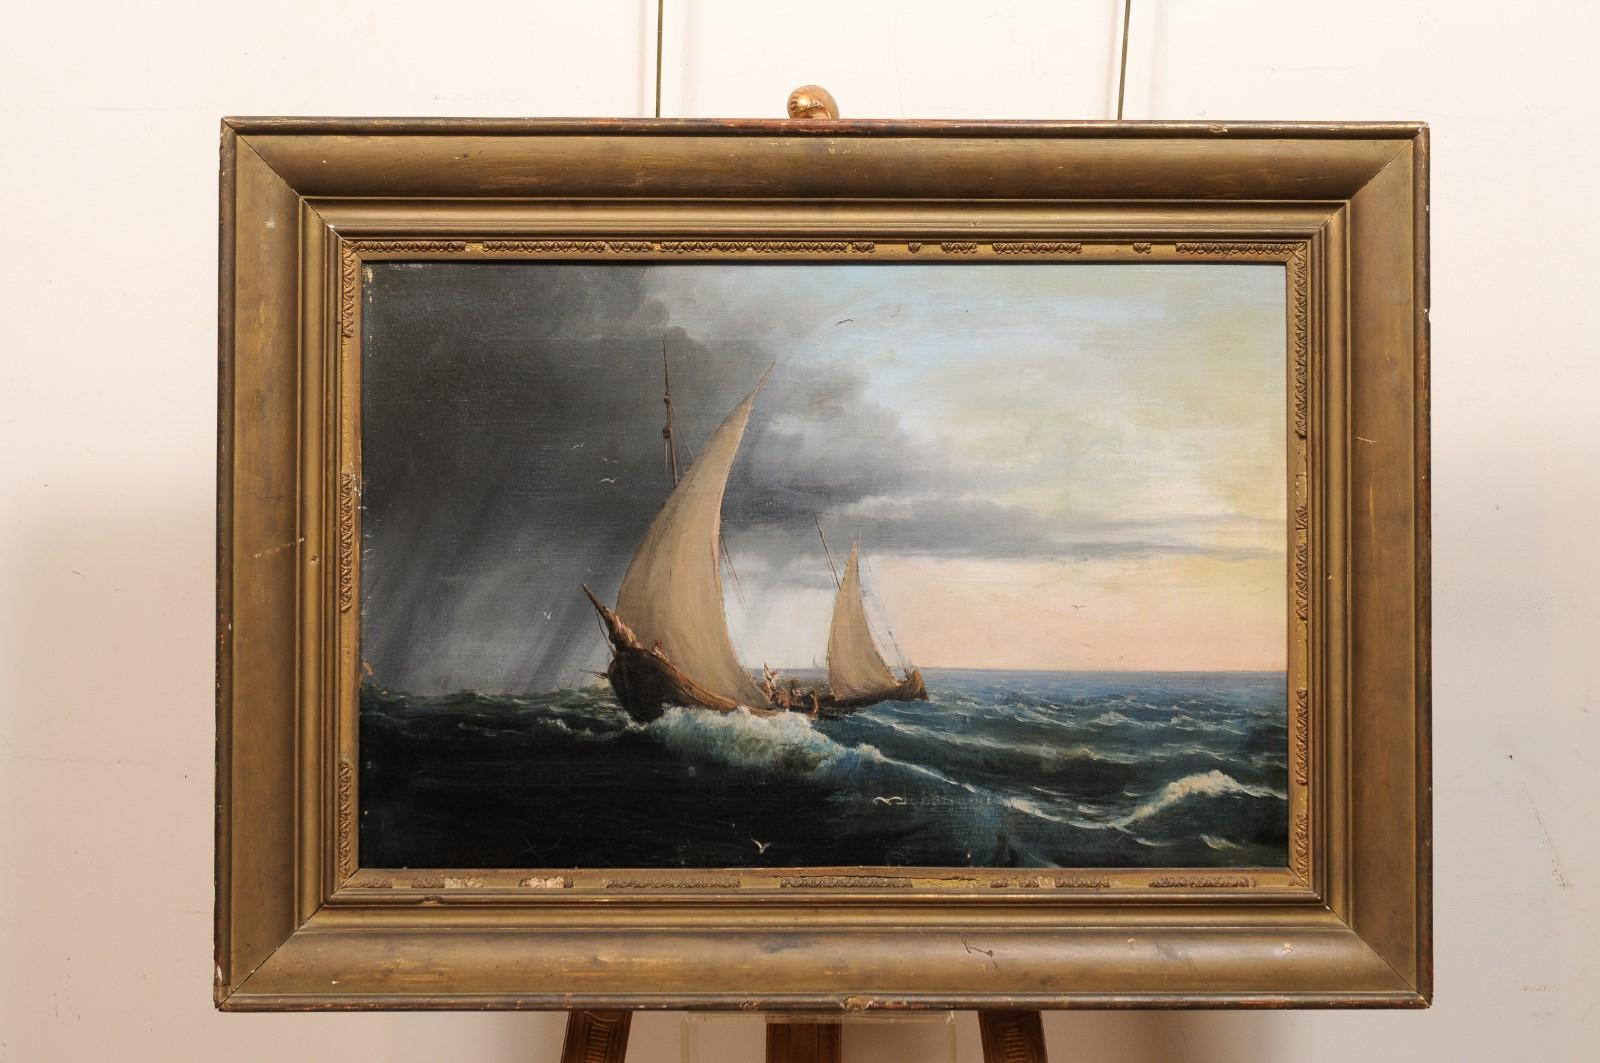 Giltwood Framed 19th Century Italian Oil on Canvas Seascape Painting, Signed “Fausto Zanotto”